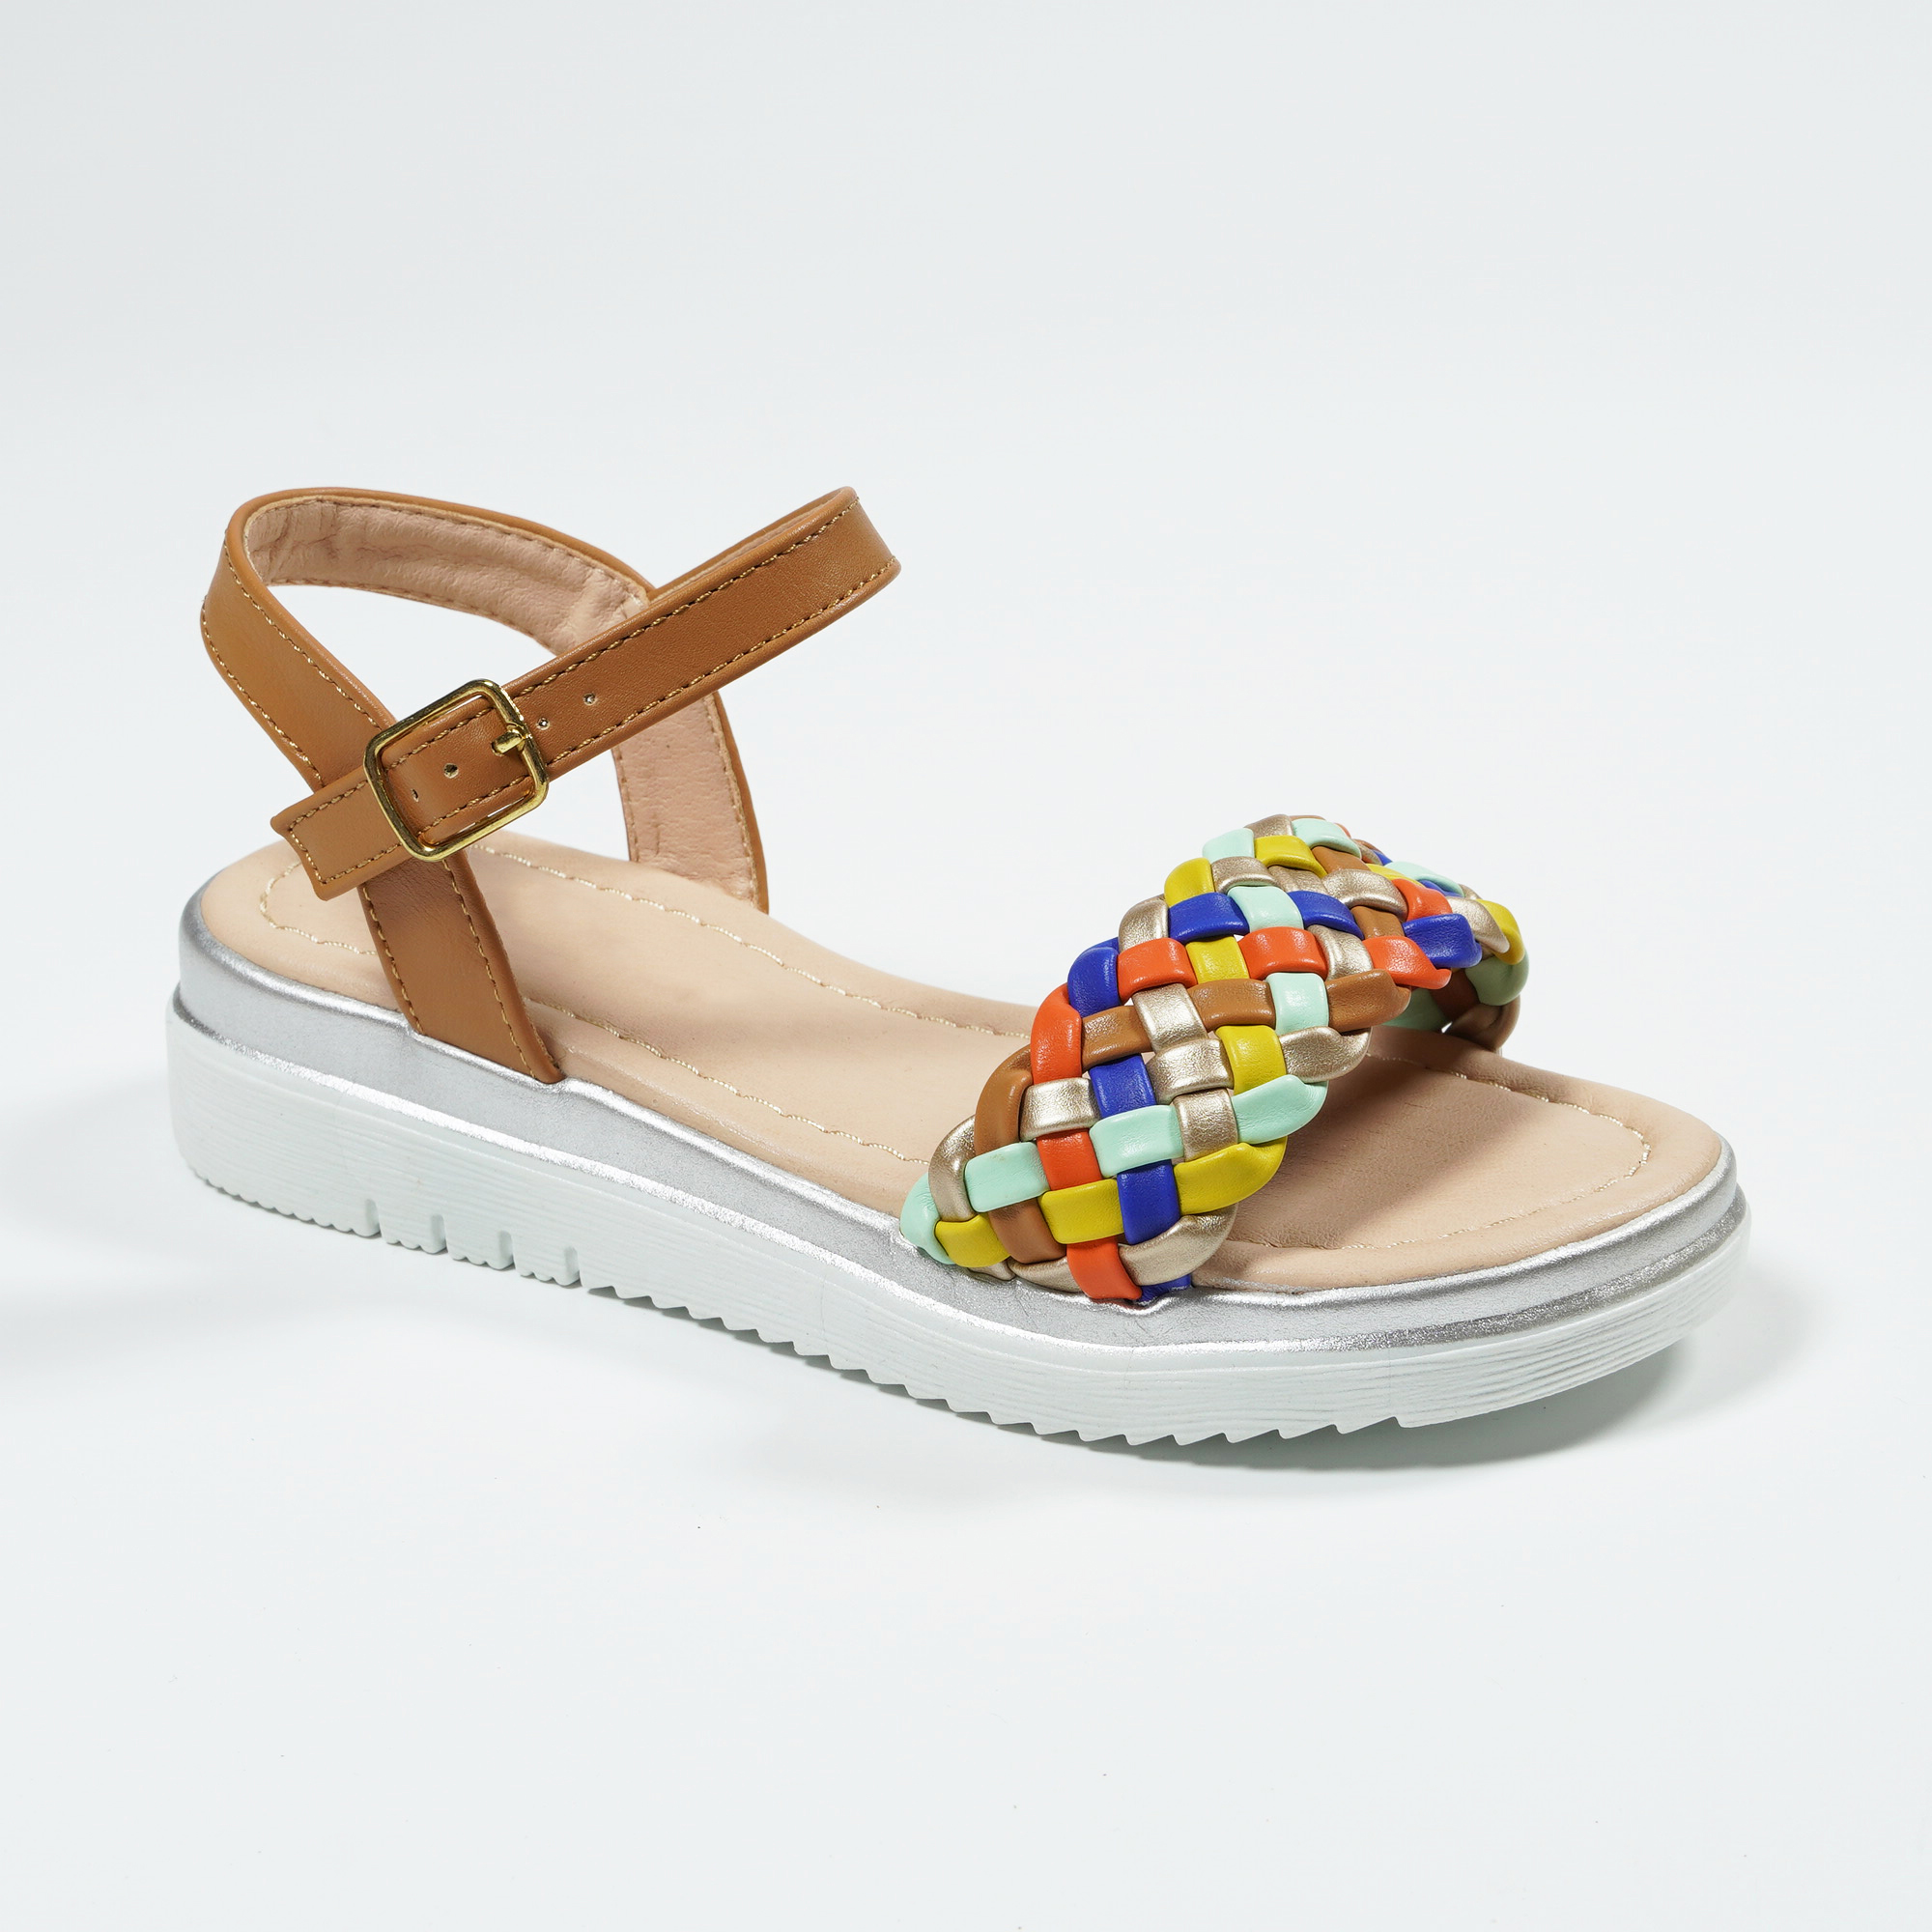 Nikoofly Colorful Mosaic Style Woven Upper Sandals Yidaxing Fashion Outdoor Girls Shoes